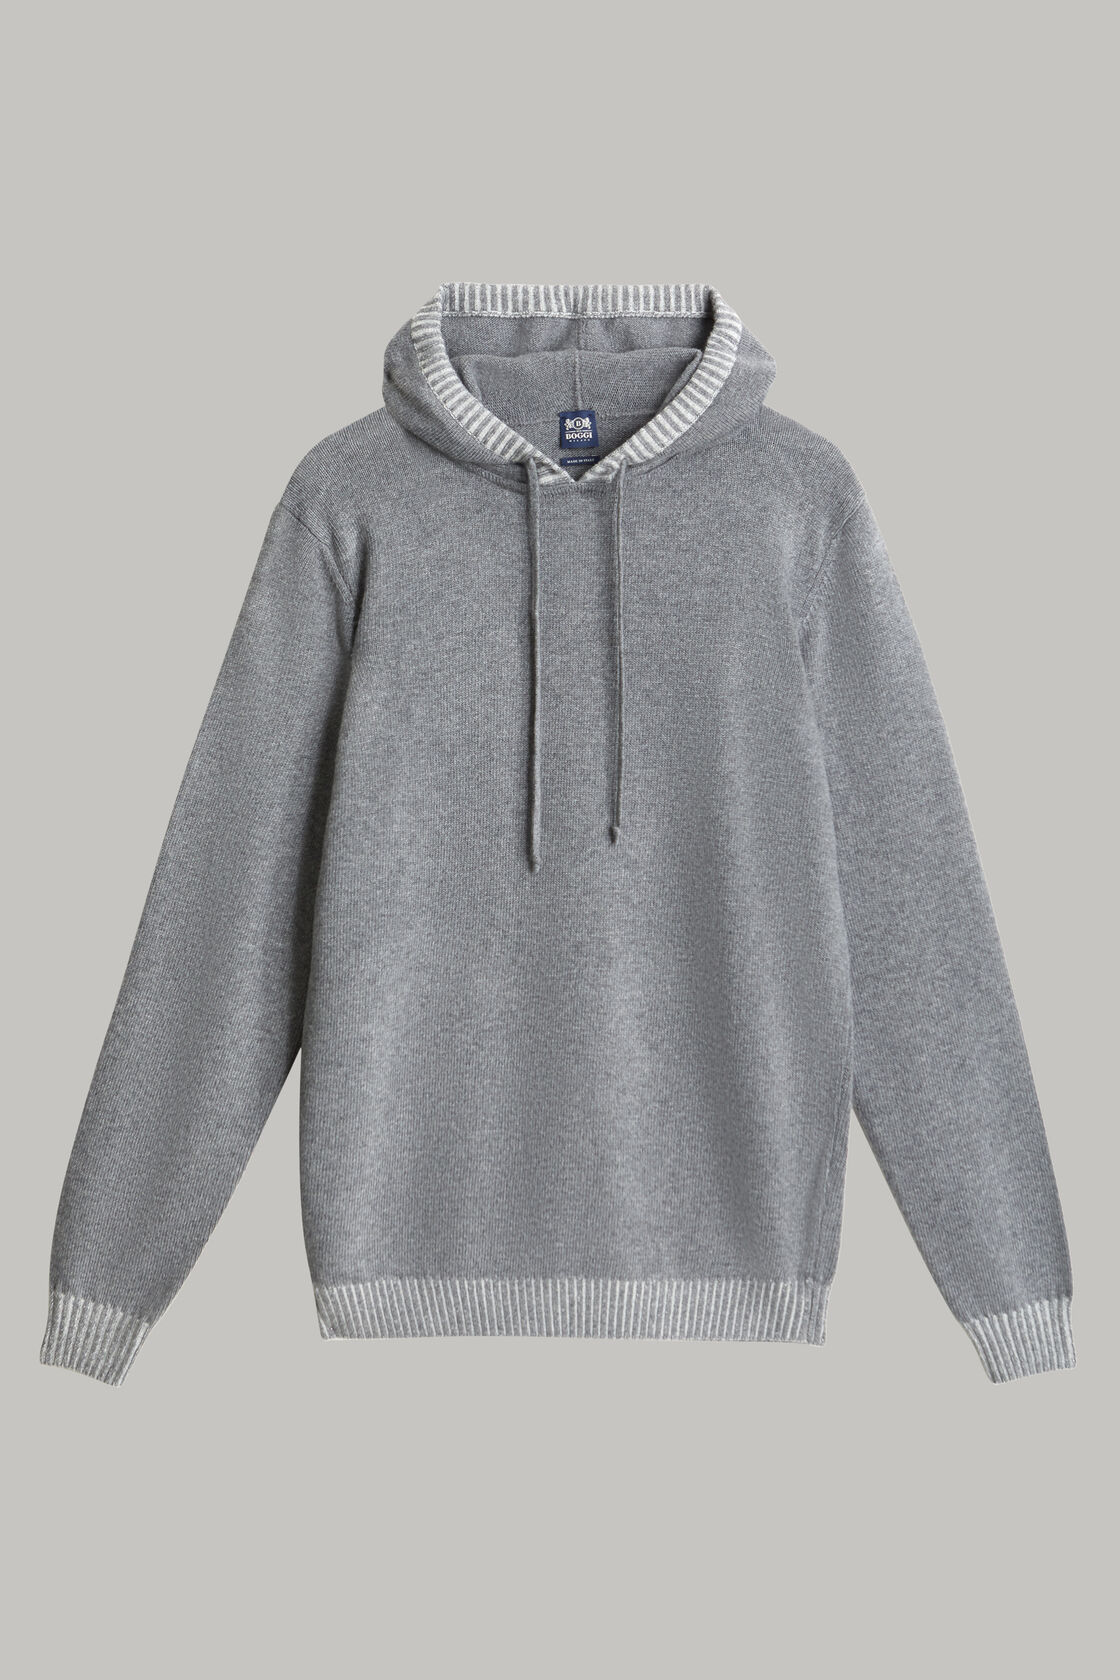 Cashmere blend hoodie sweater, , hi-res